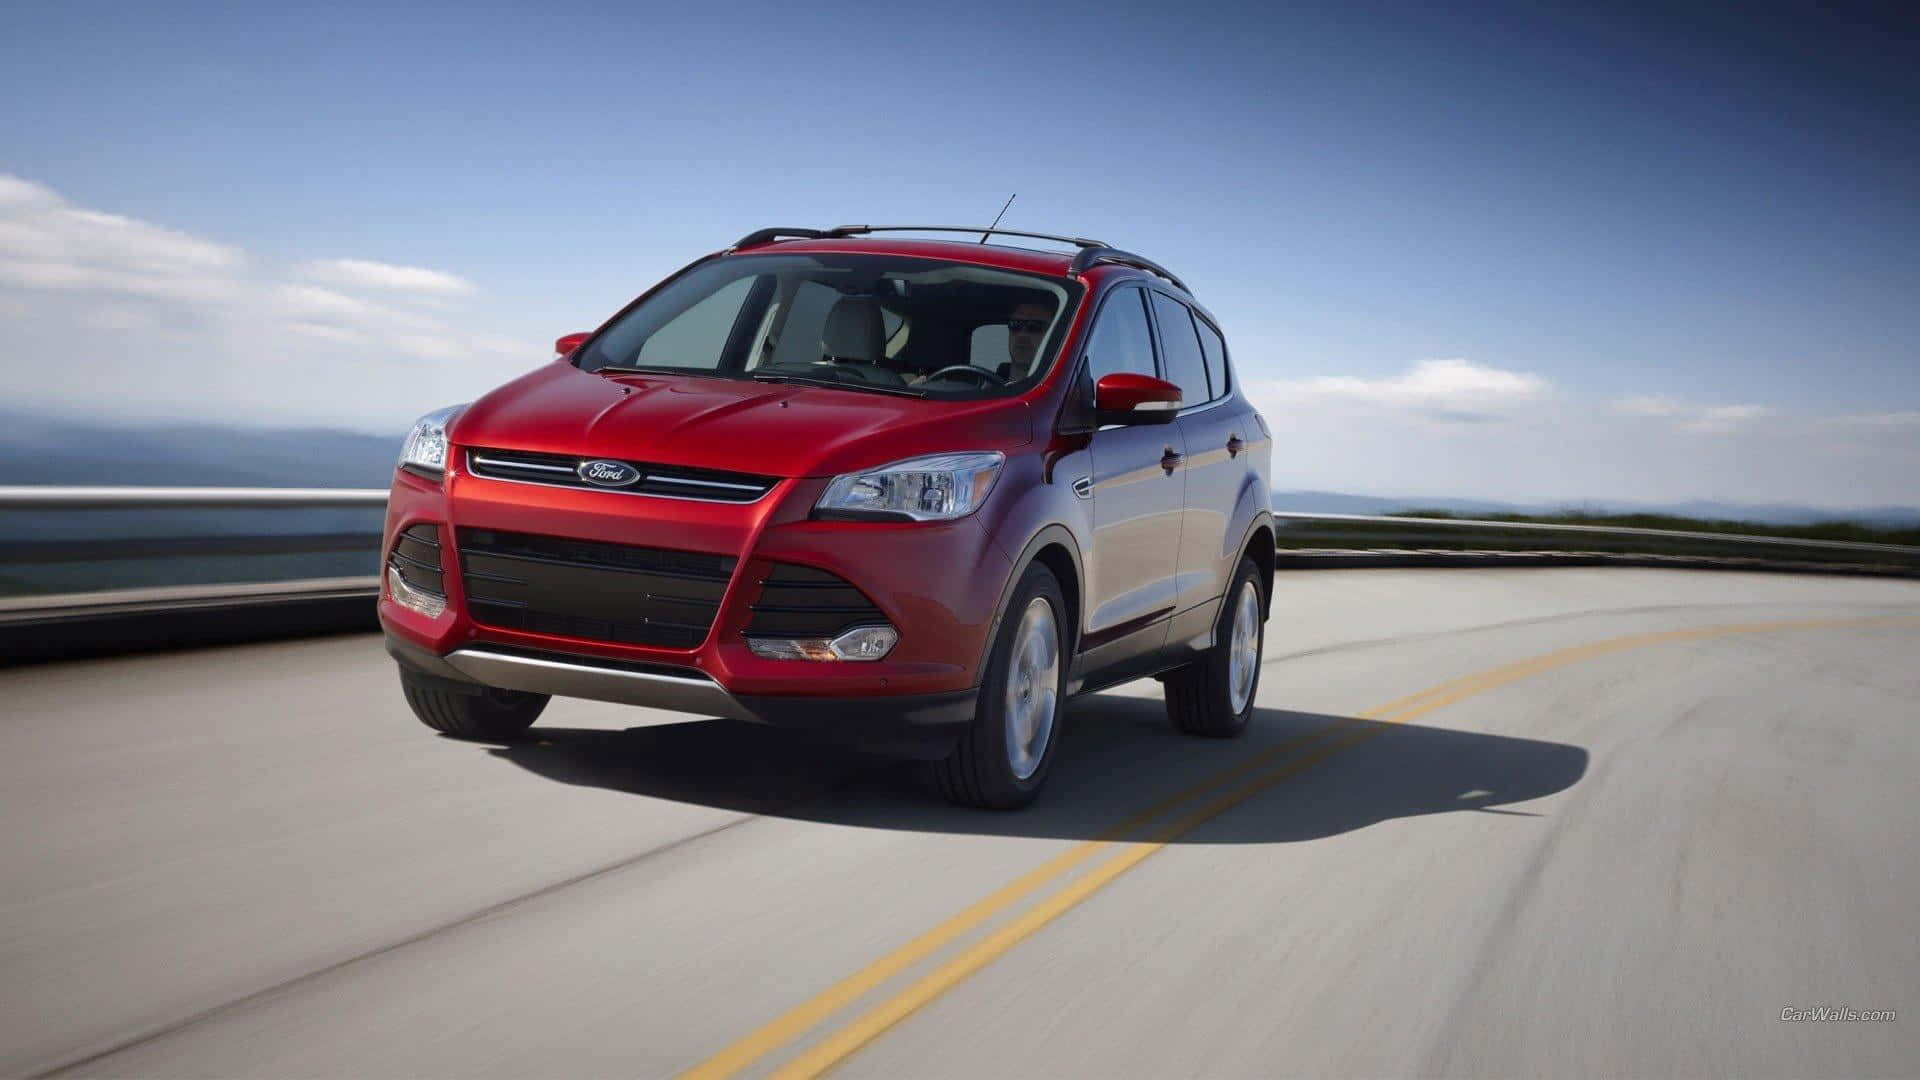 Ford Escape on a Picturesque Mountain Road Wallpaper